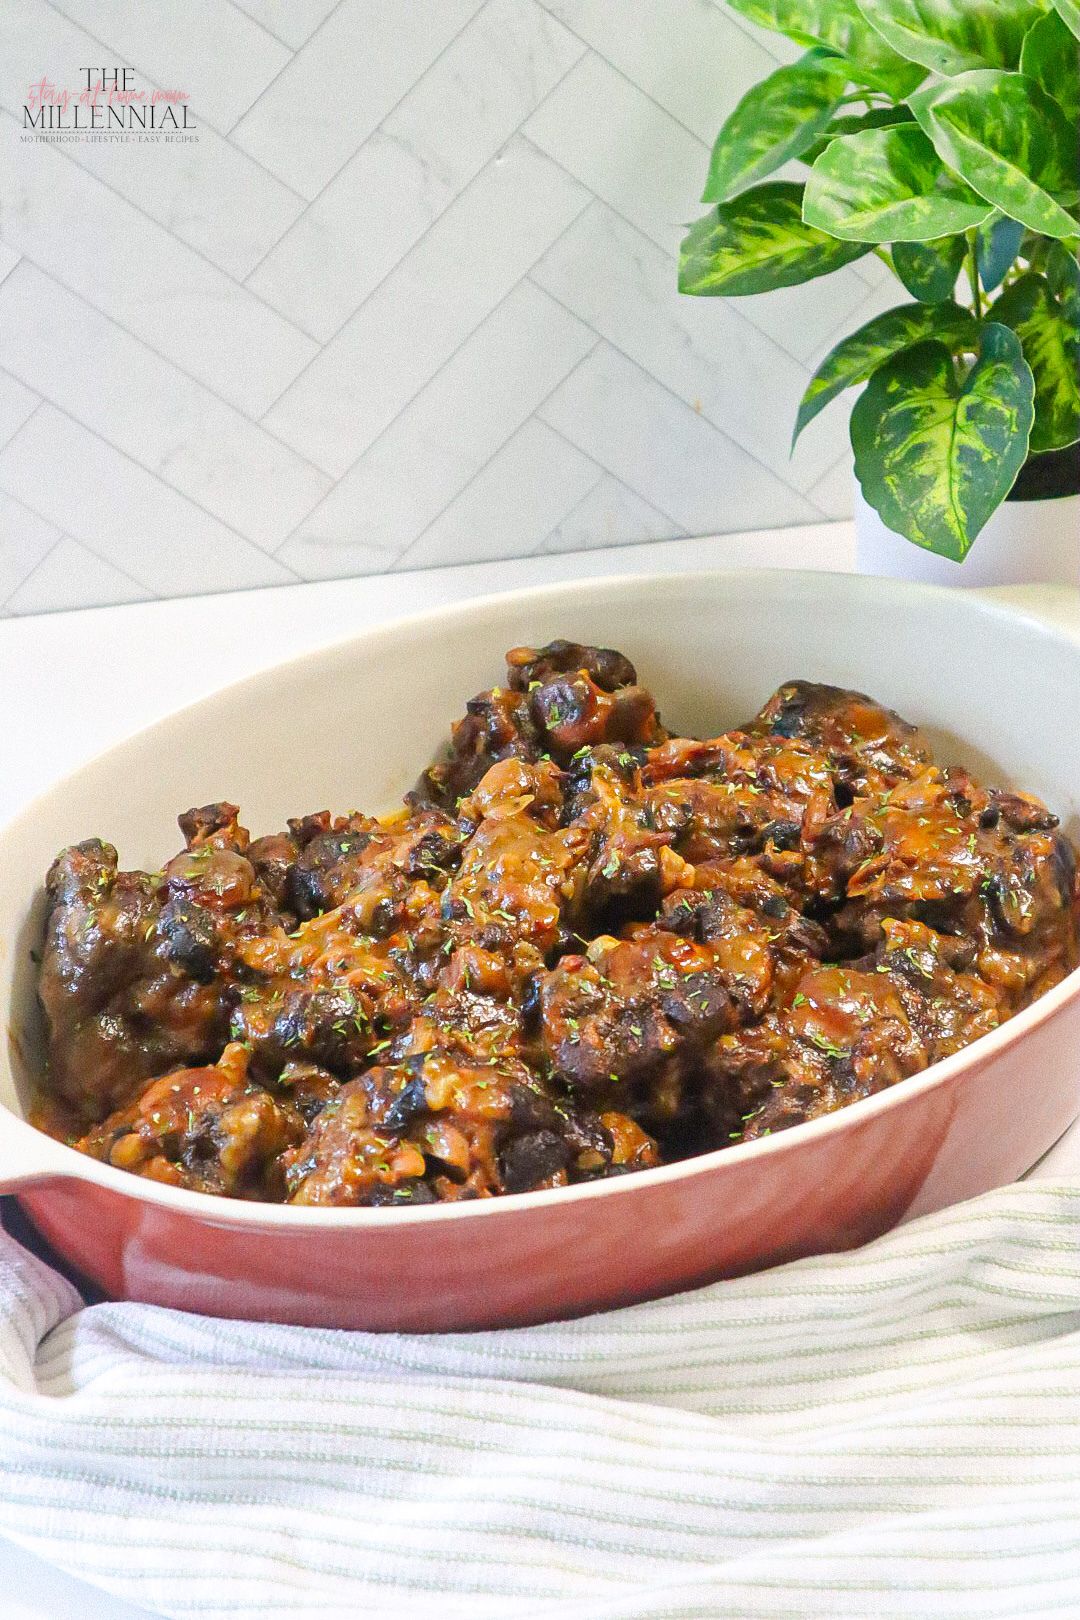 These fall-off-the-bone, slow cooker oxtails with gravy are easy to make and absolutely delicious, tender, and full of flavor!